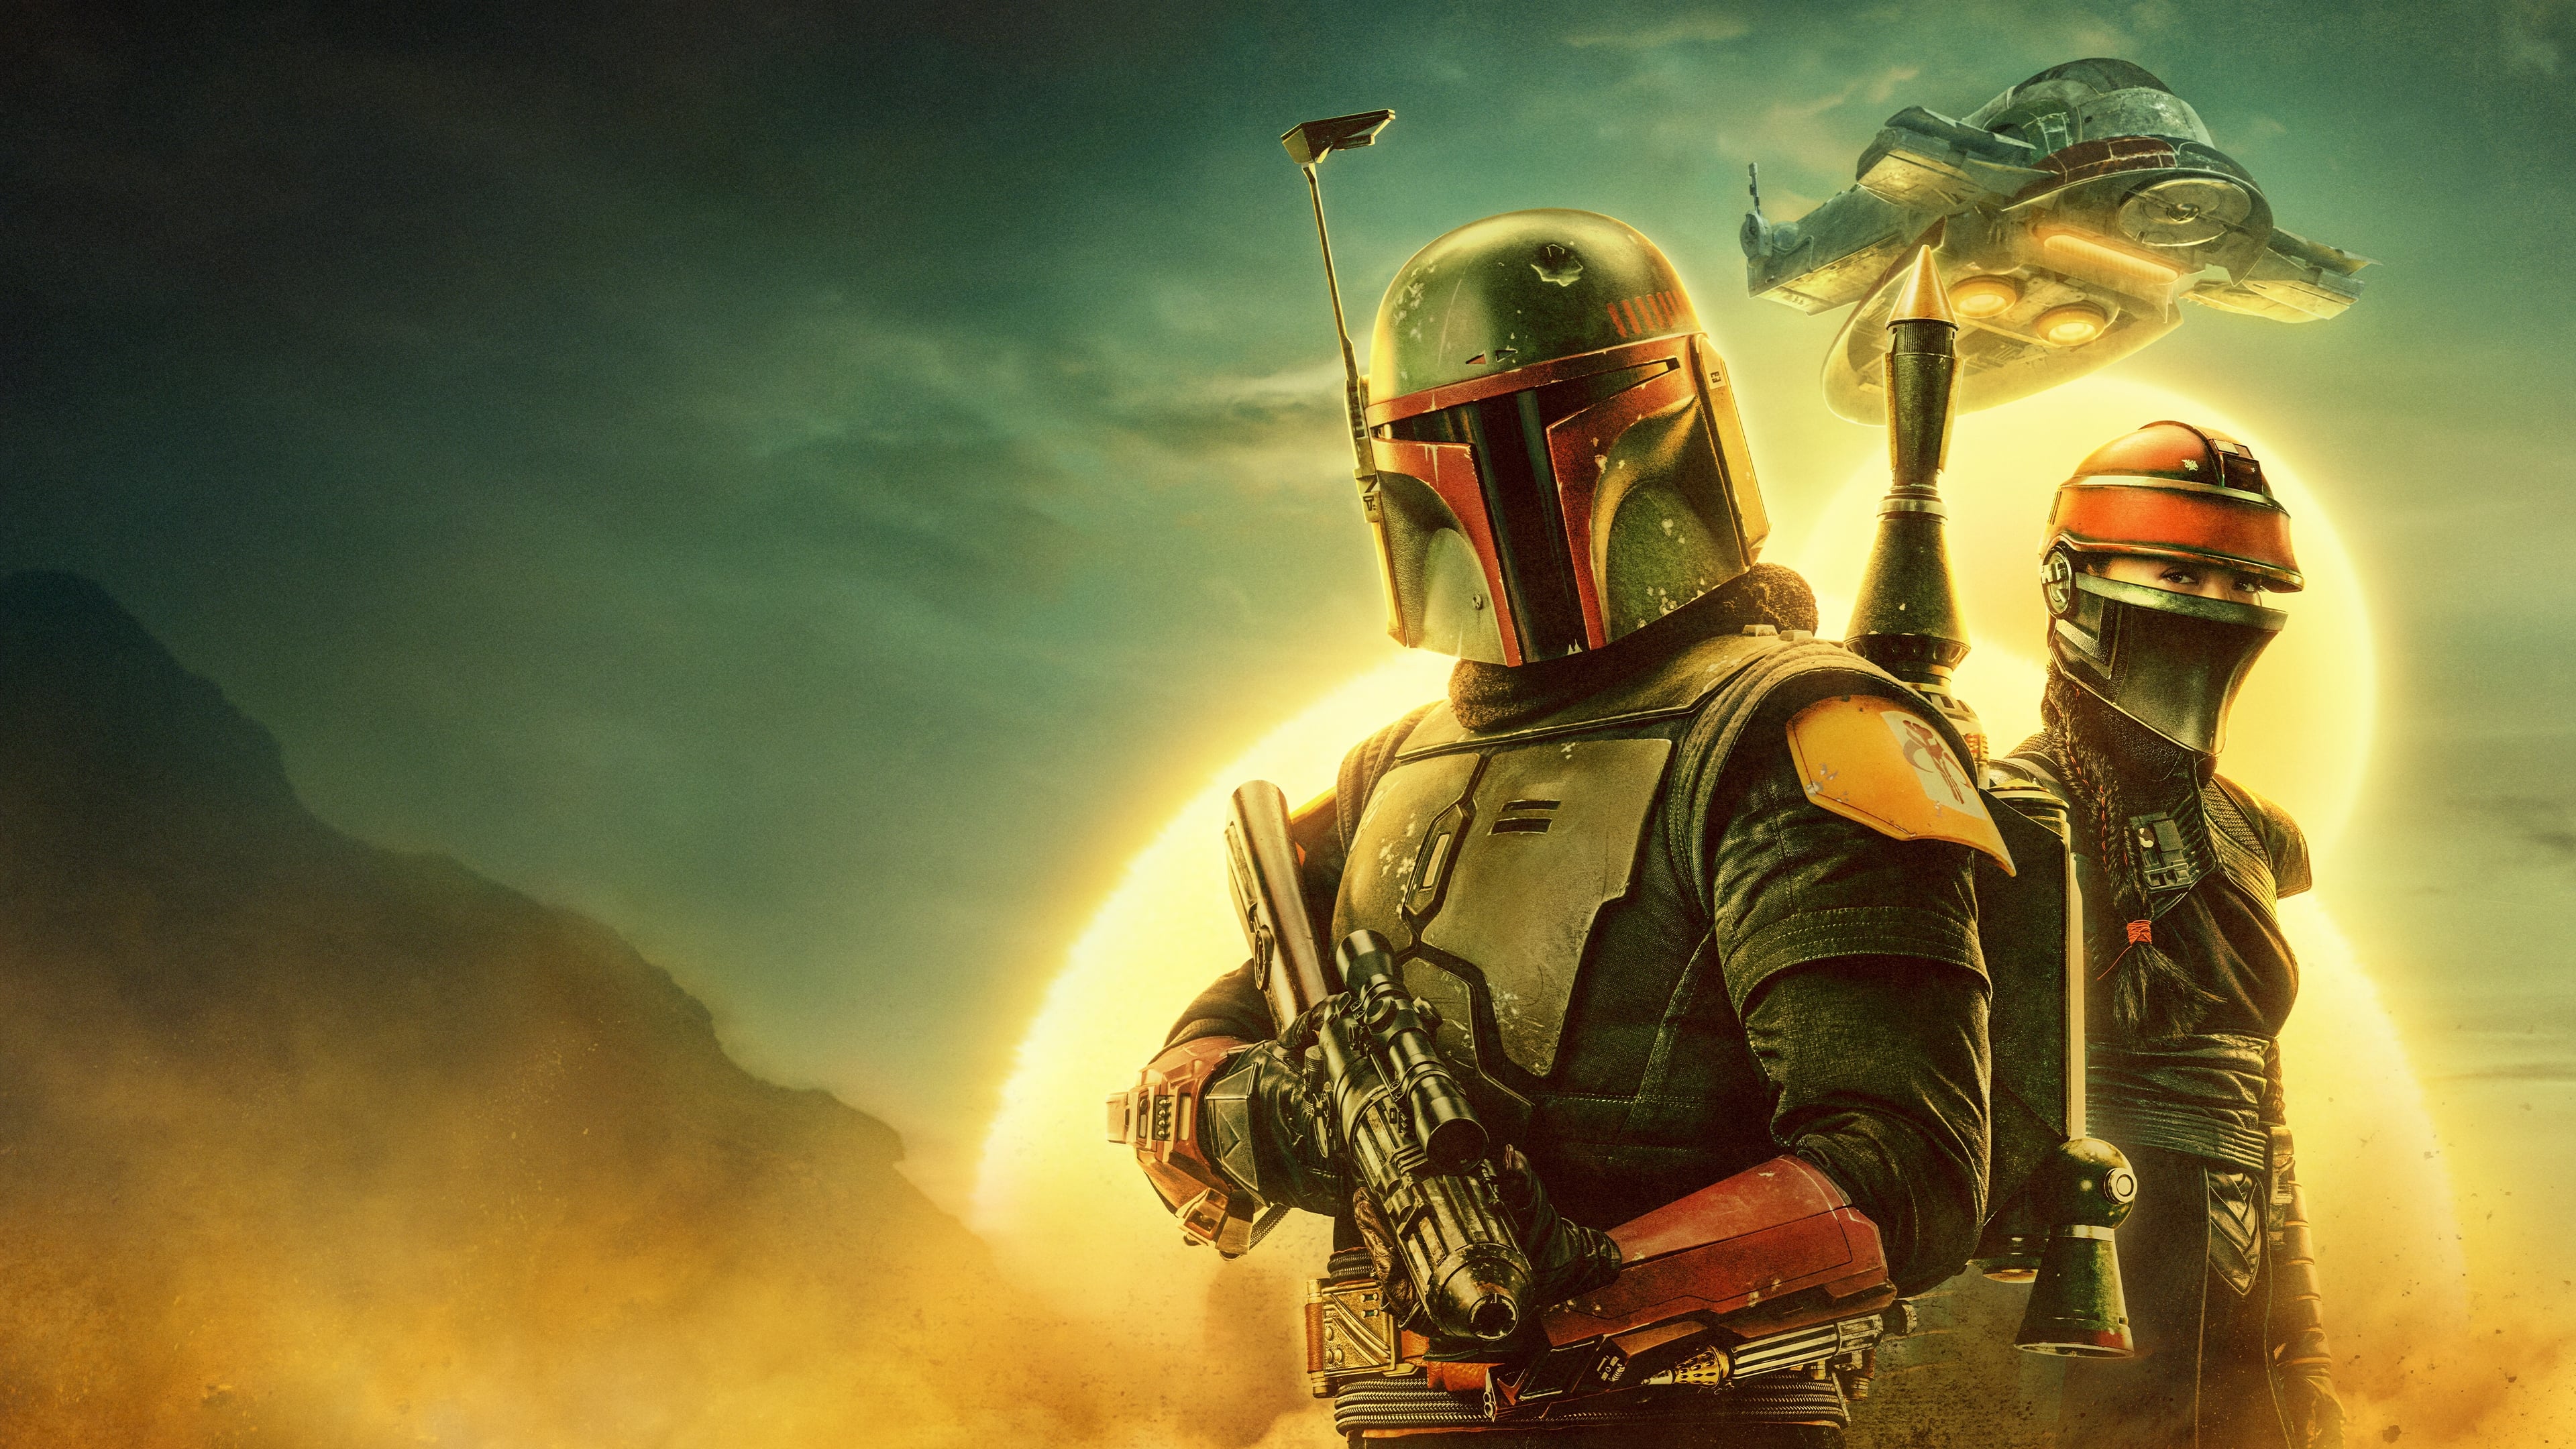 140+ Boba Fett HD Wallpapers and Backgrounds